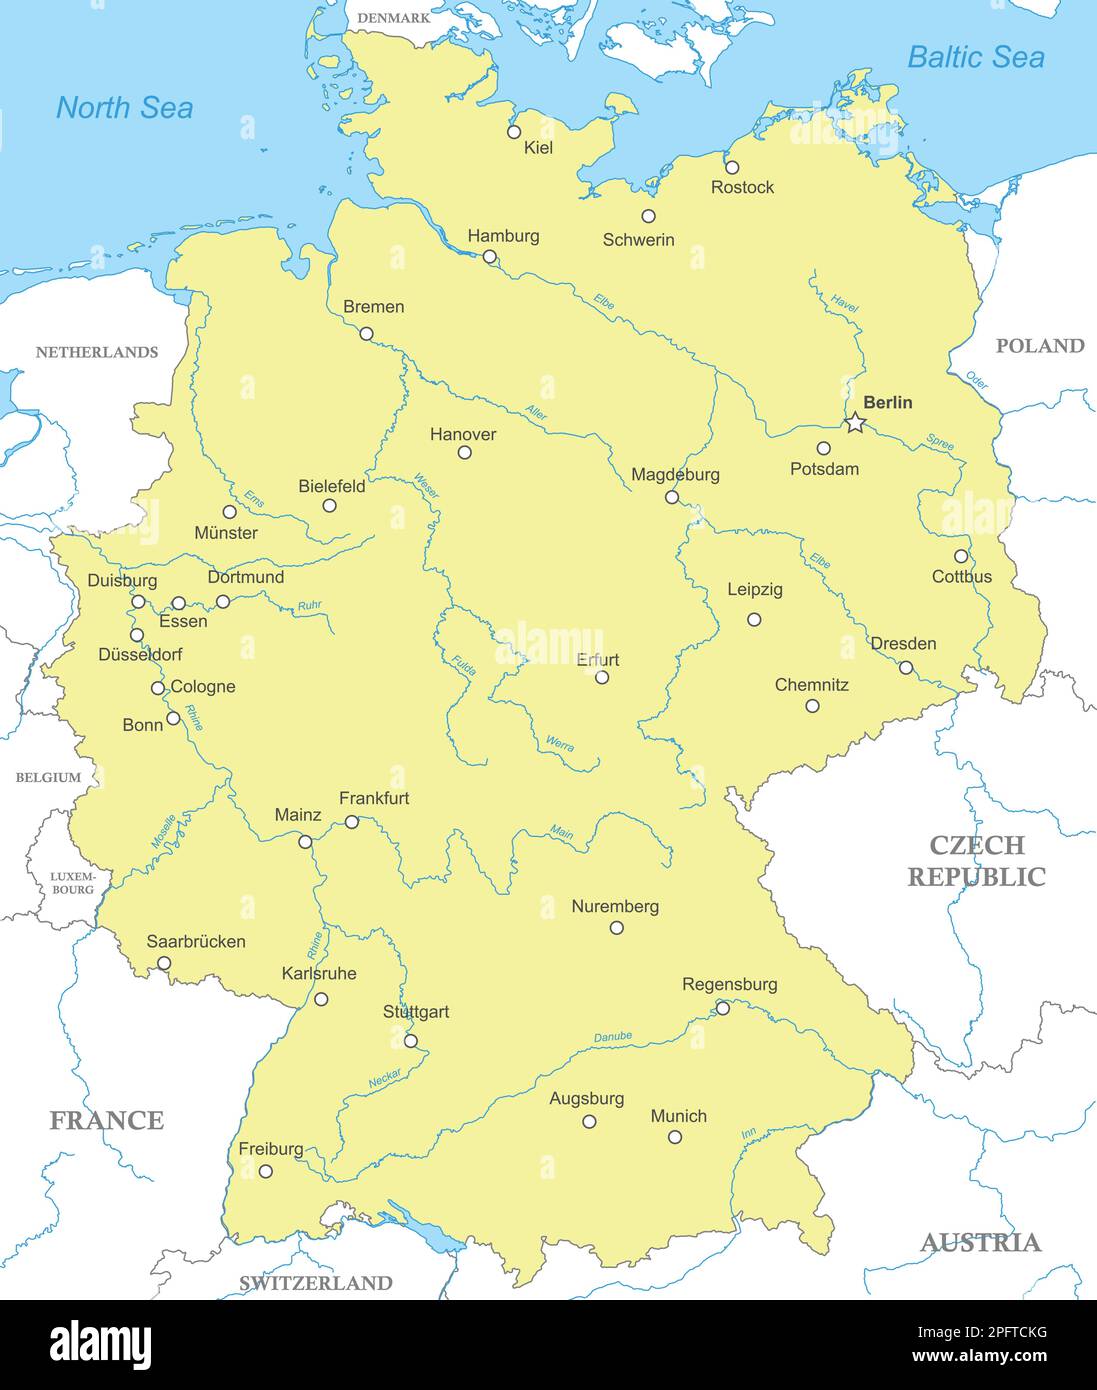 Political map of Germany with national borders, cities and rivers Stock Vector